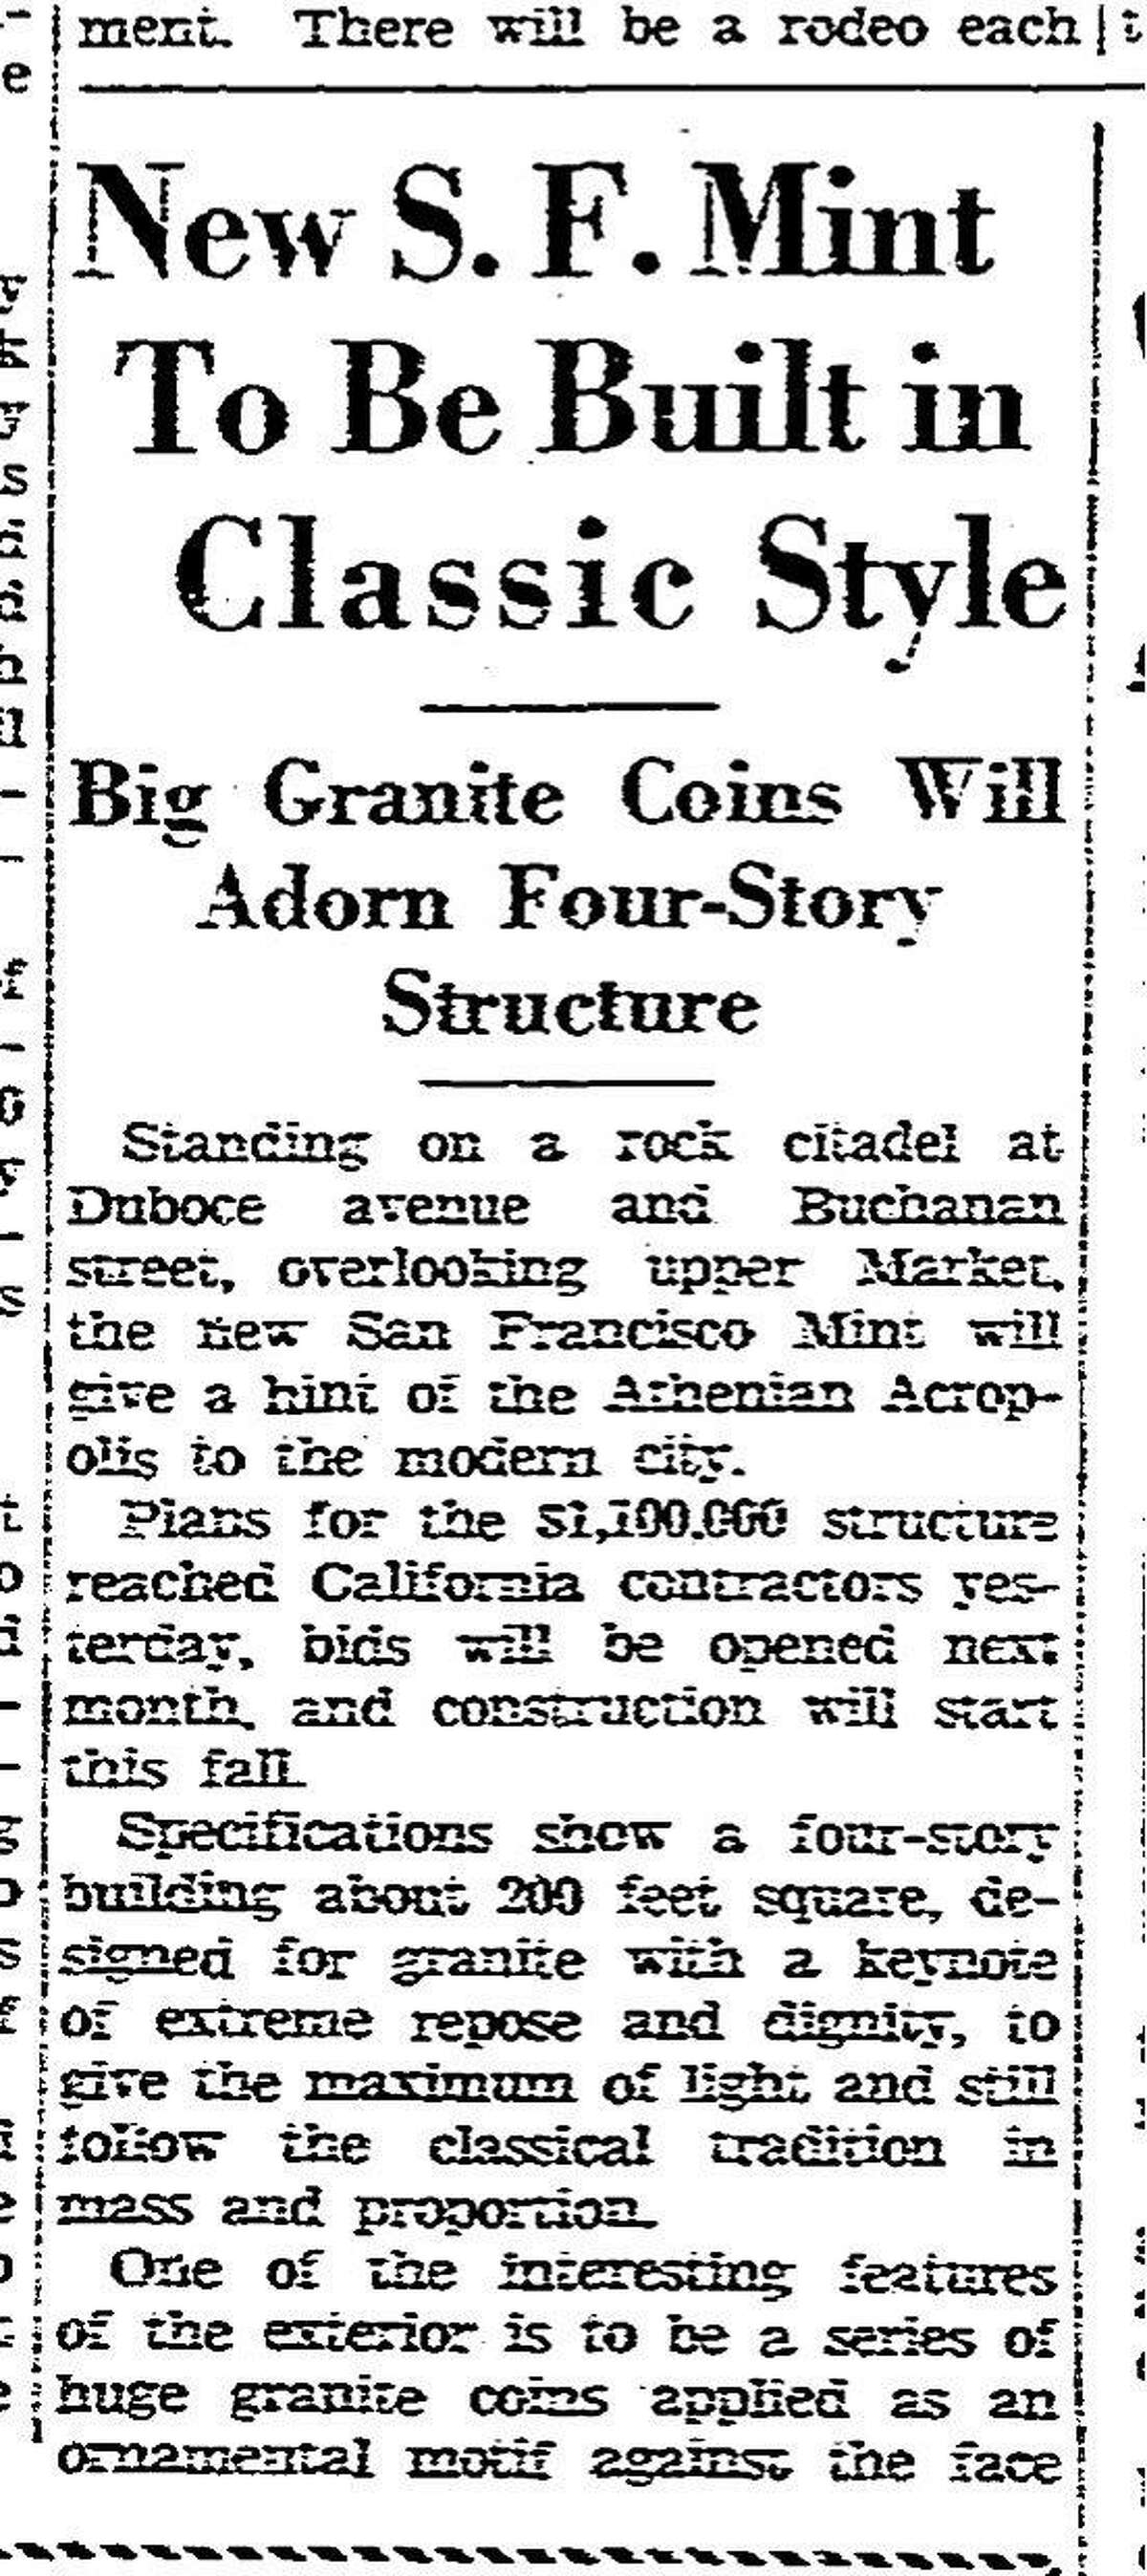 The Chronicle reported that the new U.S. Mint was to be built at the corner of Buchanan and Duboce near Market Street in San Francisco June 27, 1935